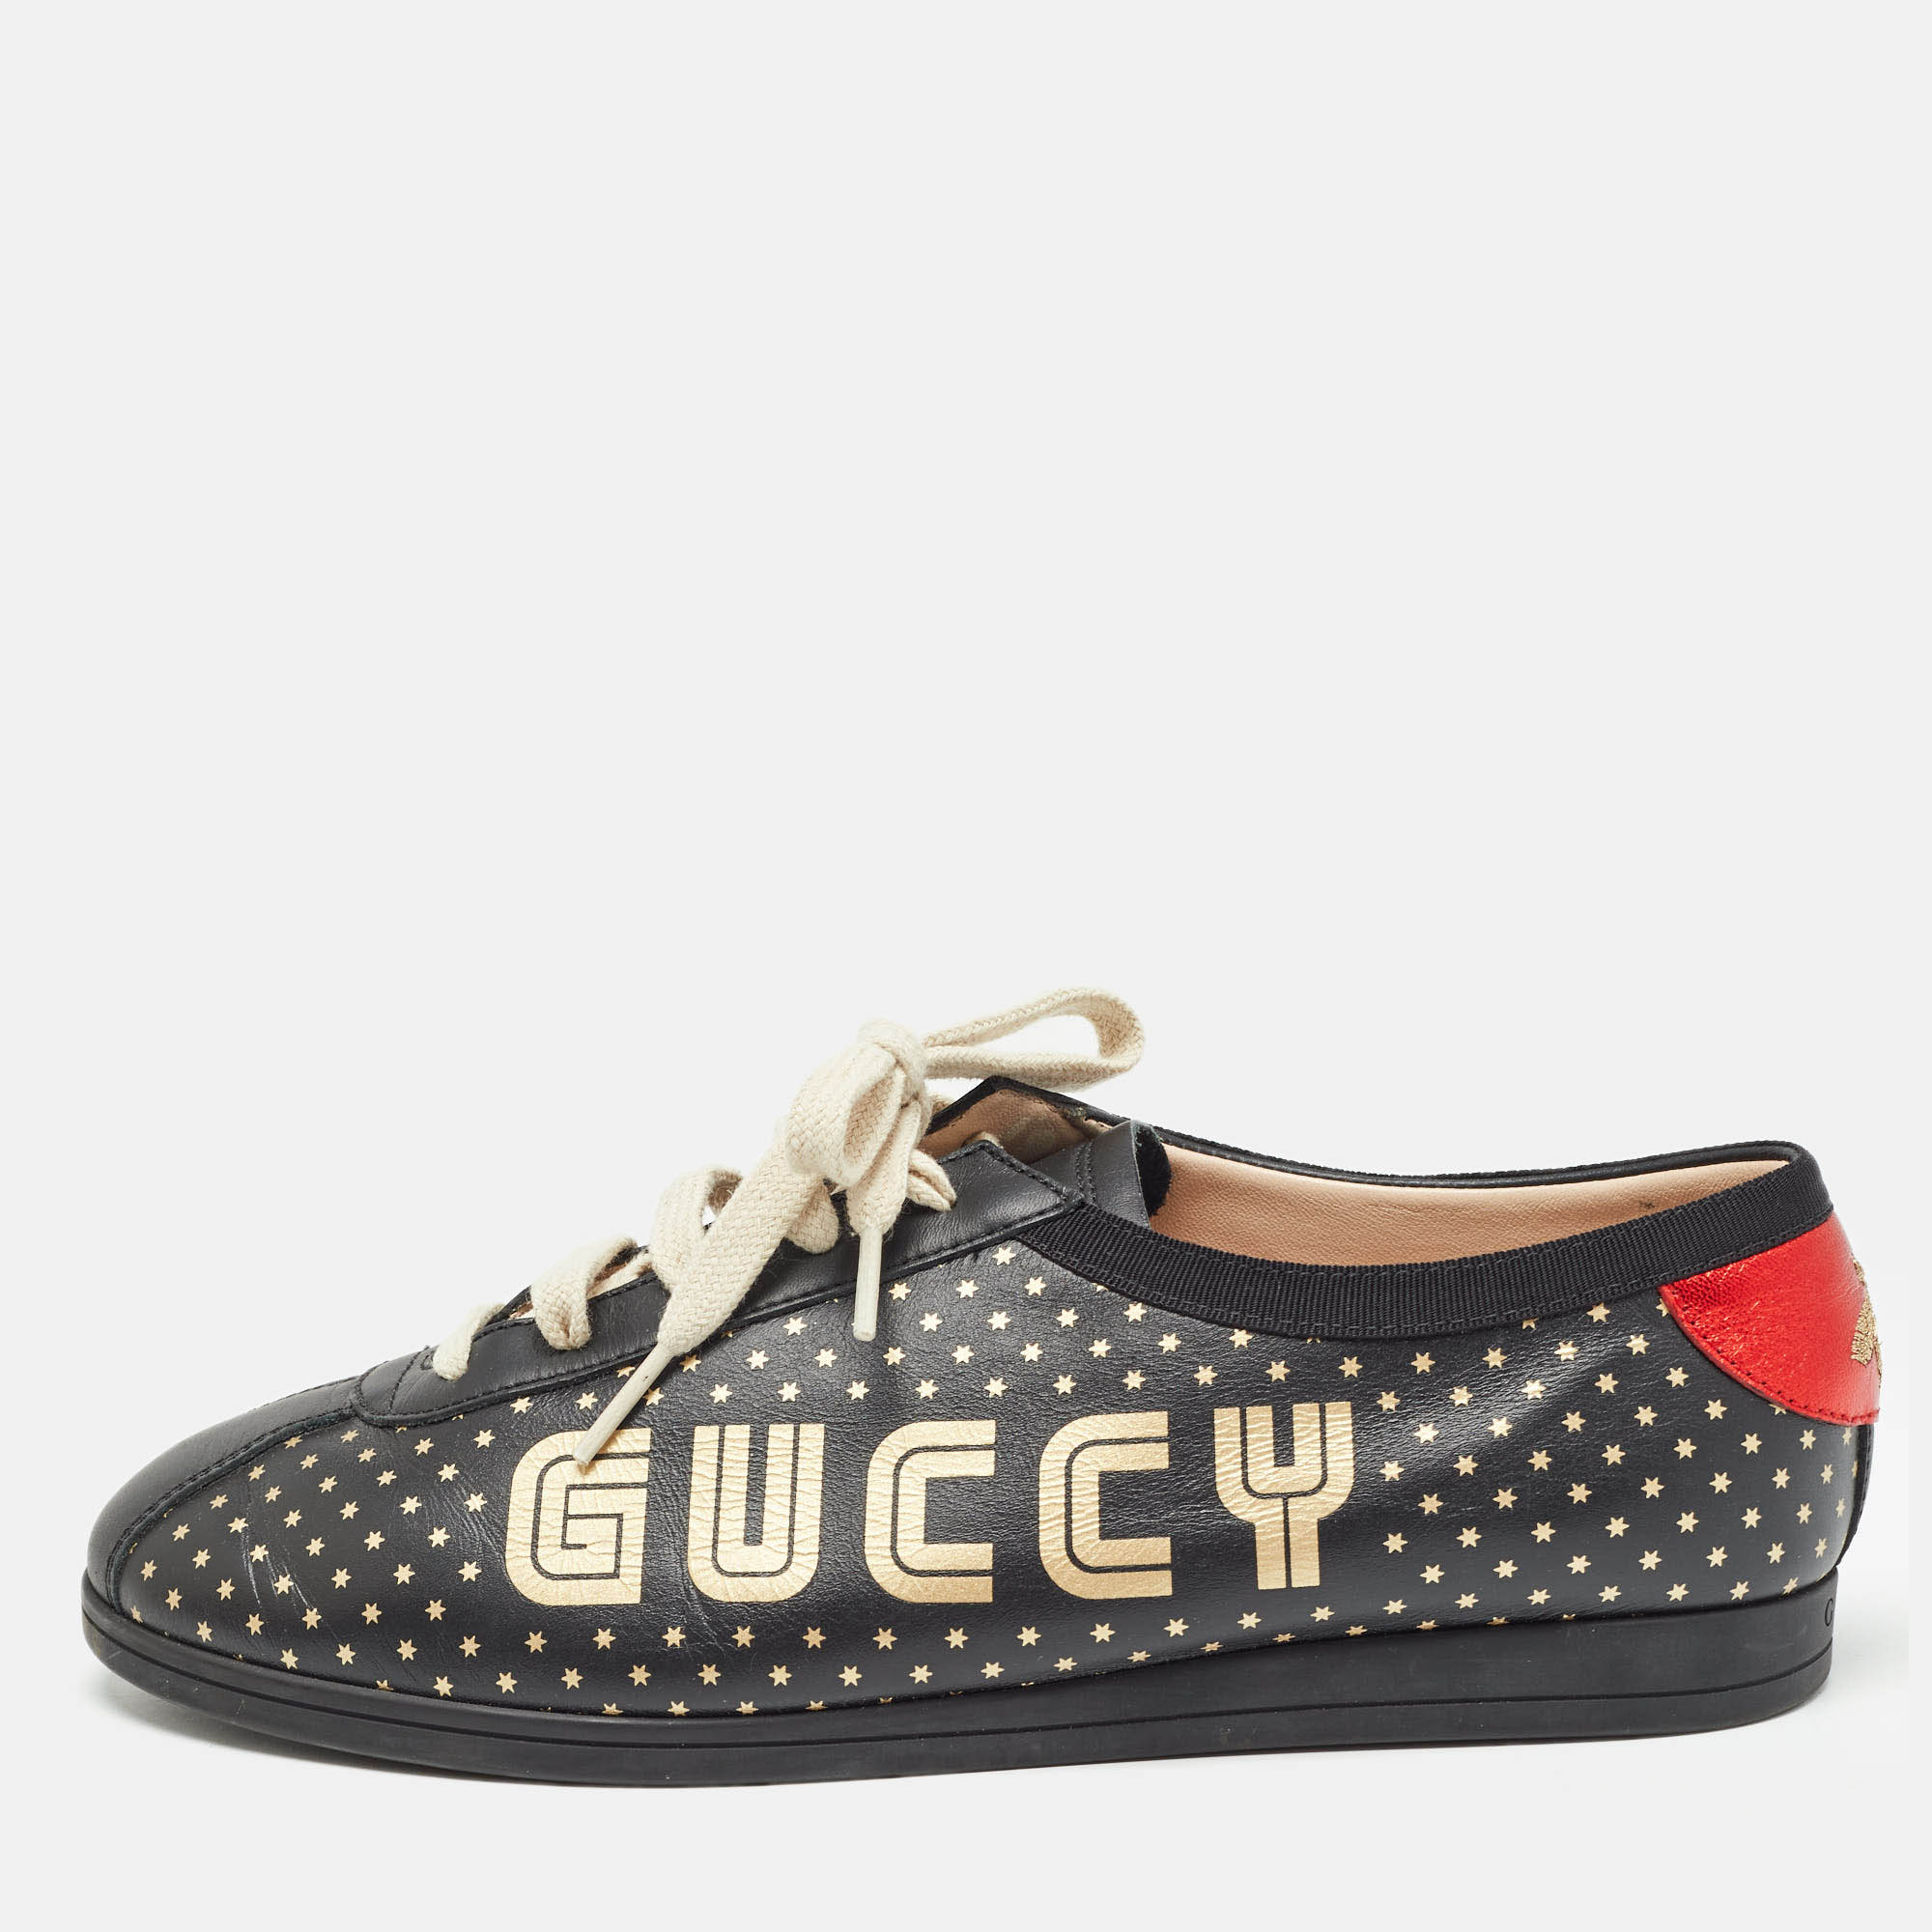 Pre-owned Gucci Black Leather Guccy Stars Falacer Sneakers Size 38